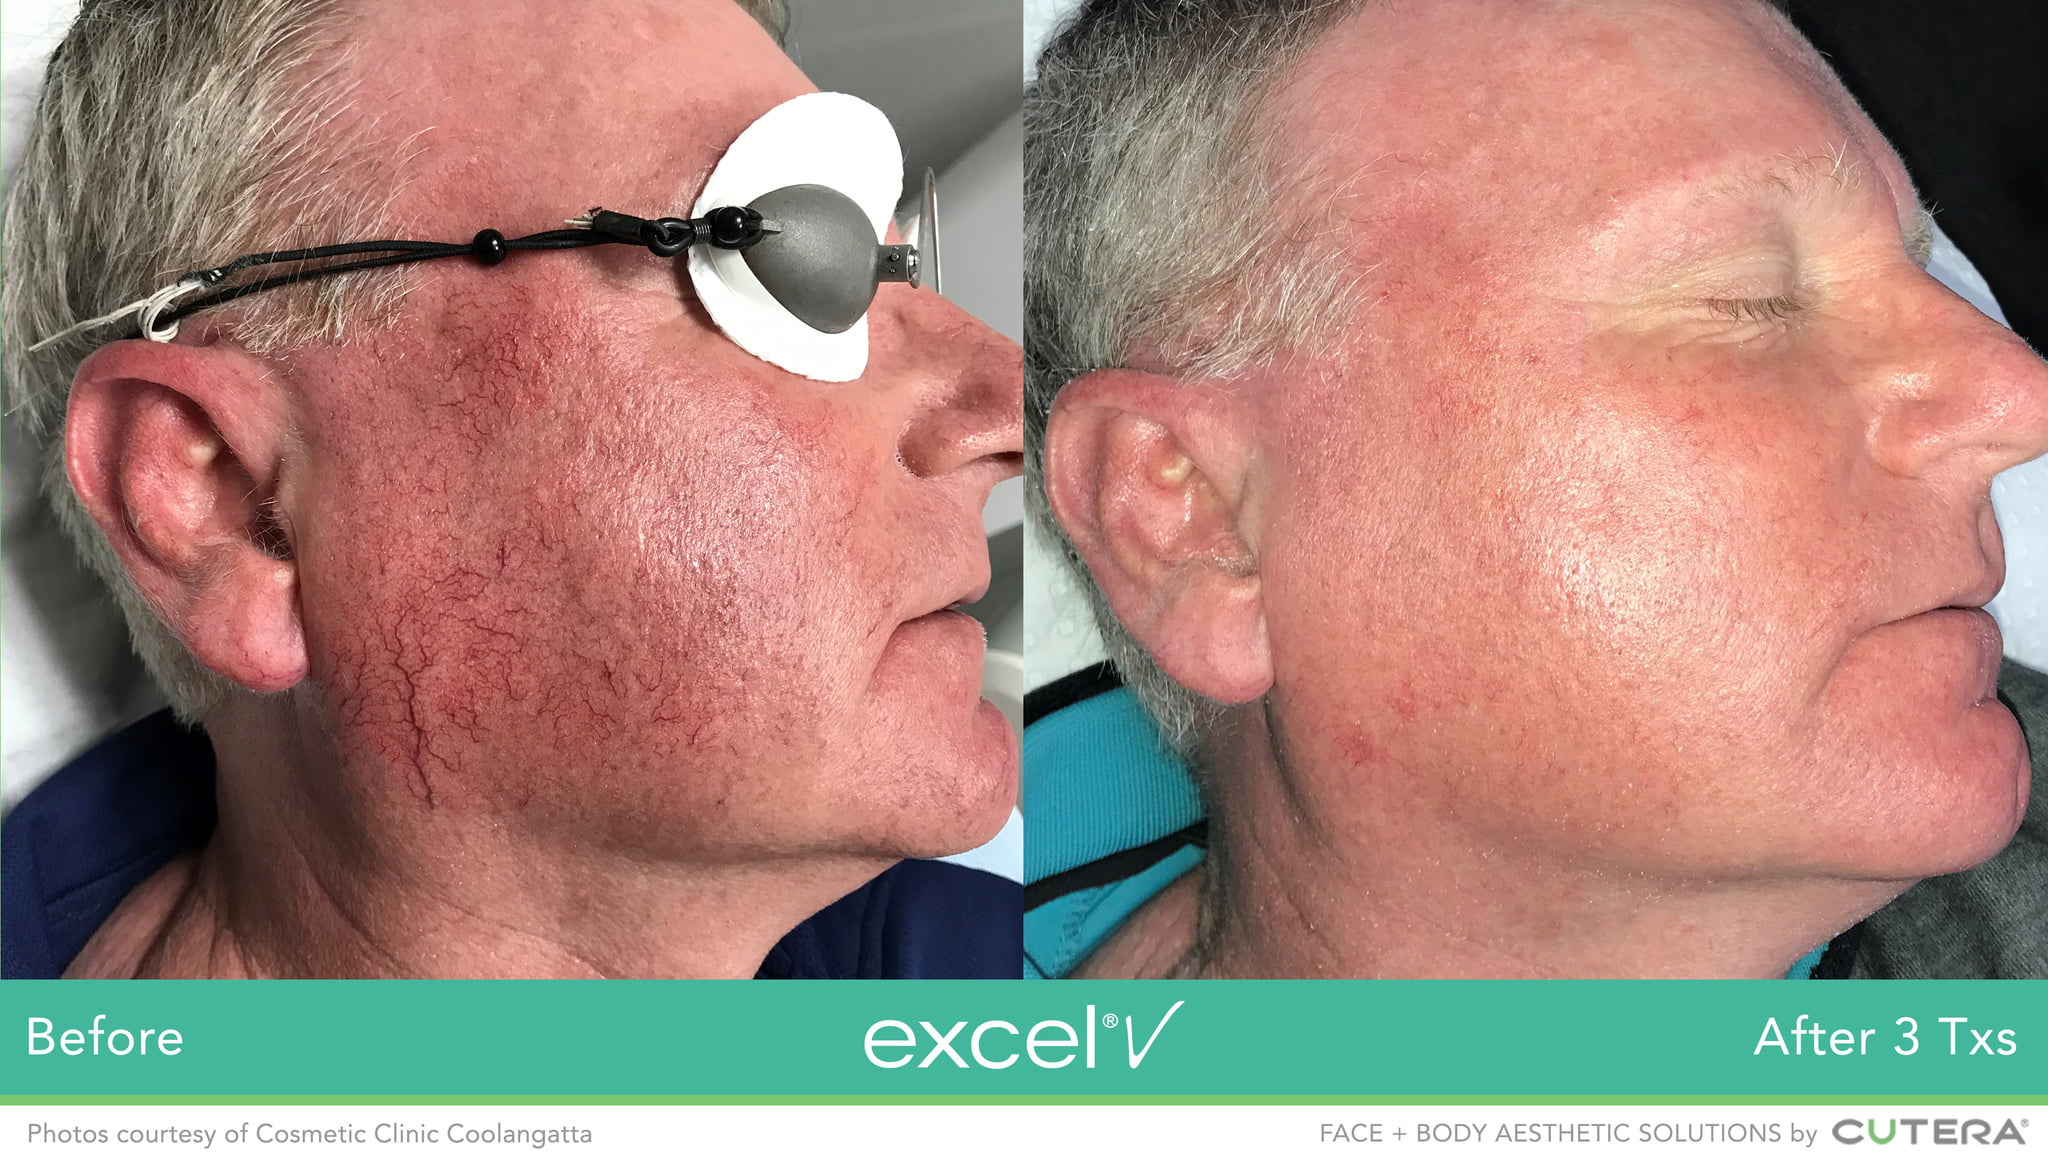 man's side of face before and after laser treatment with excel V to erase redness and visible veins